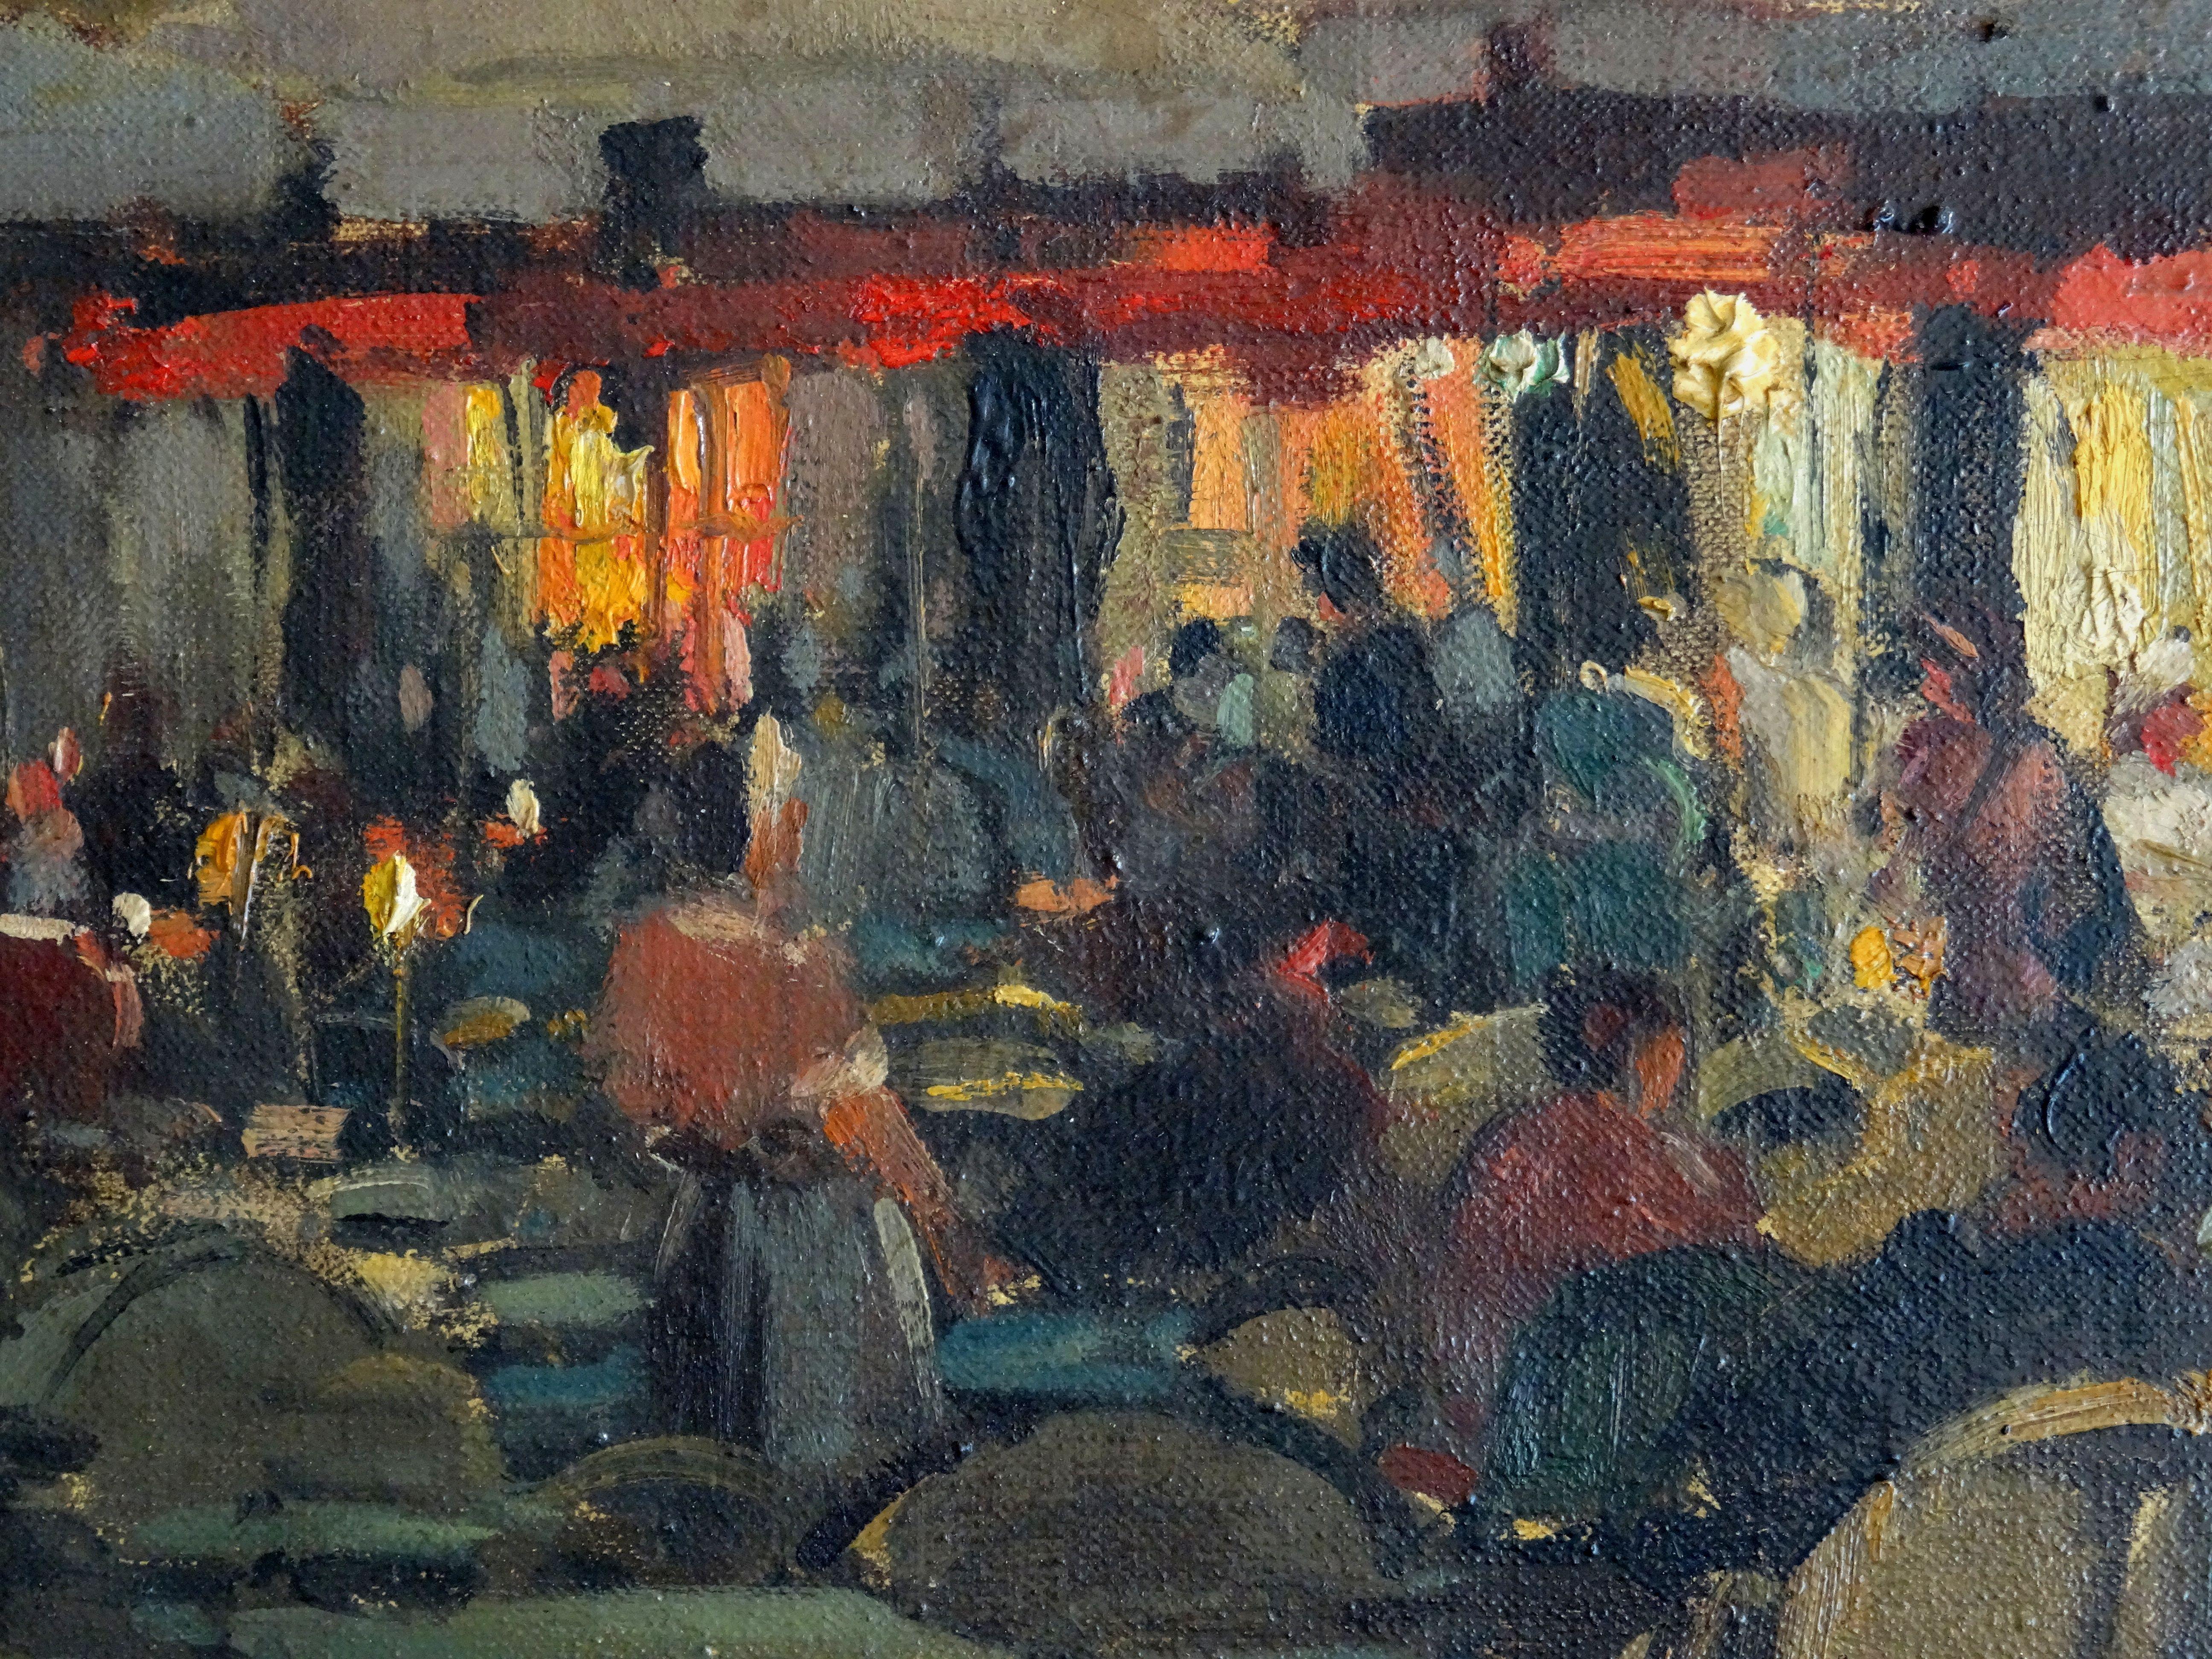 Restaurant terrace at evening in Montmartre, Paris. Oil on canvas, 46x38 cm - Painting by Serge Kislakoff